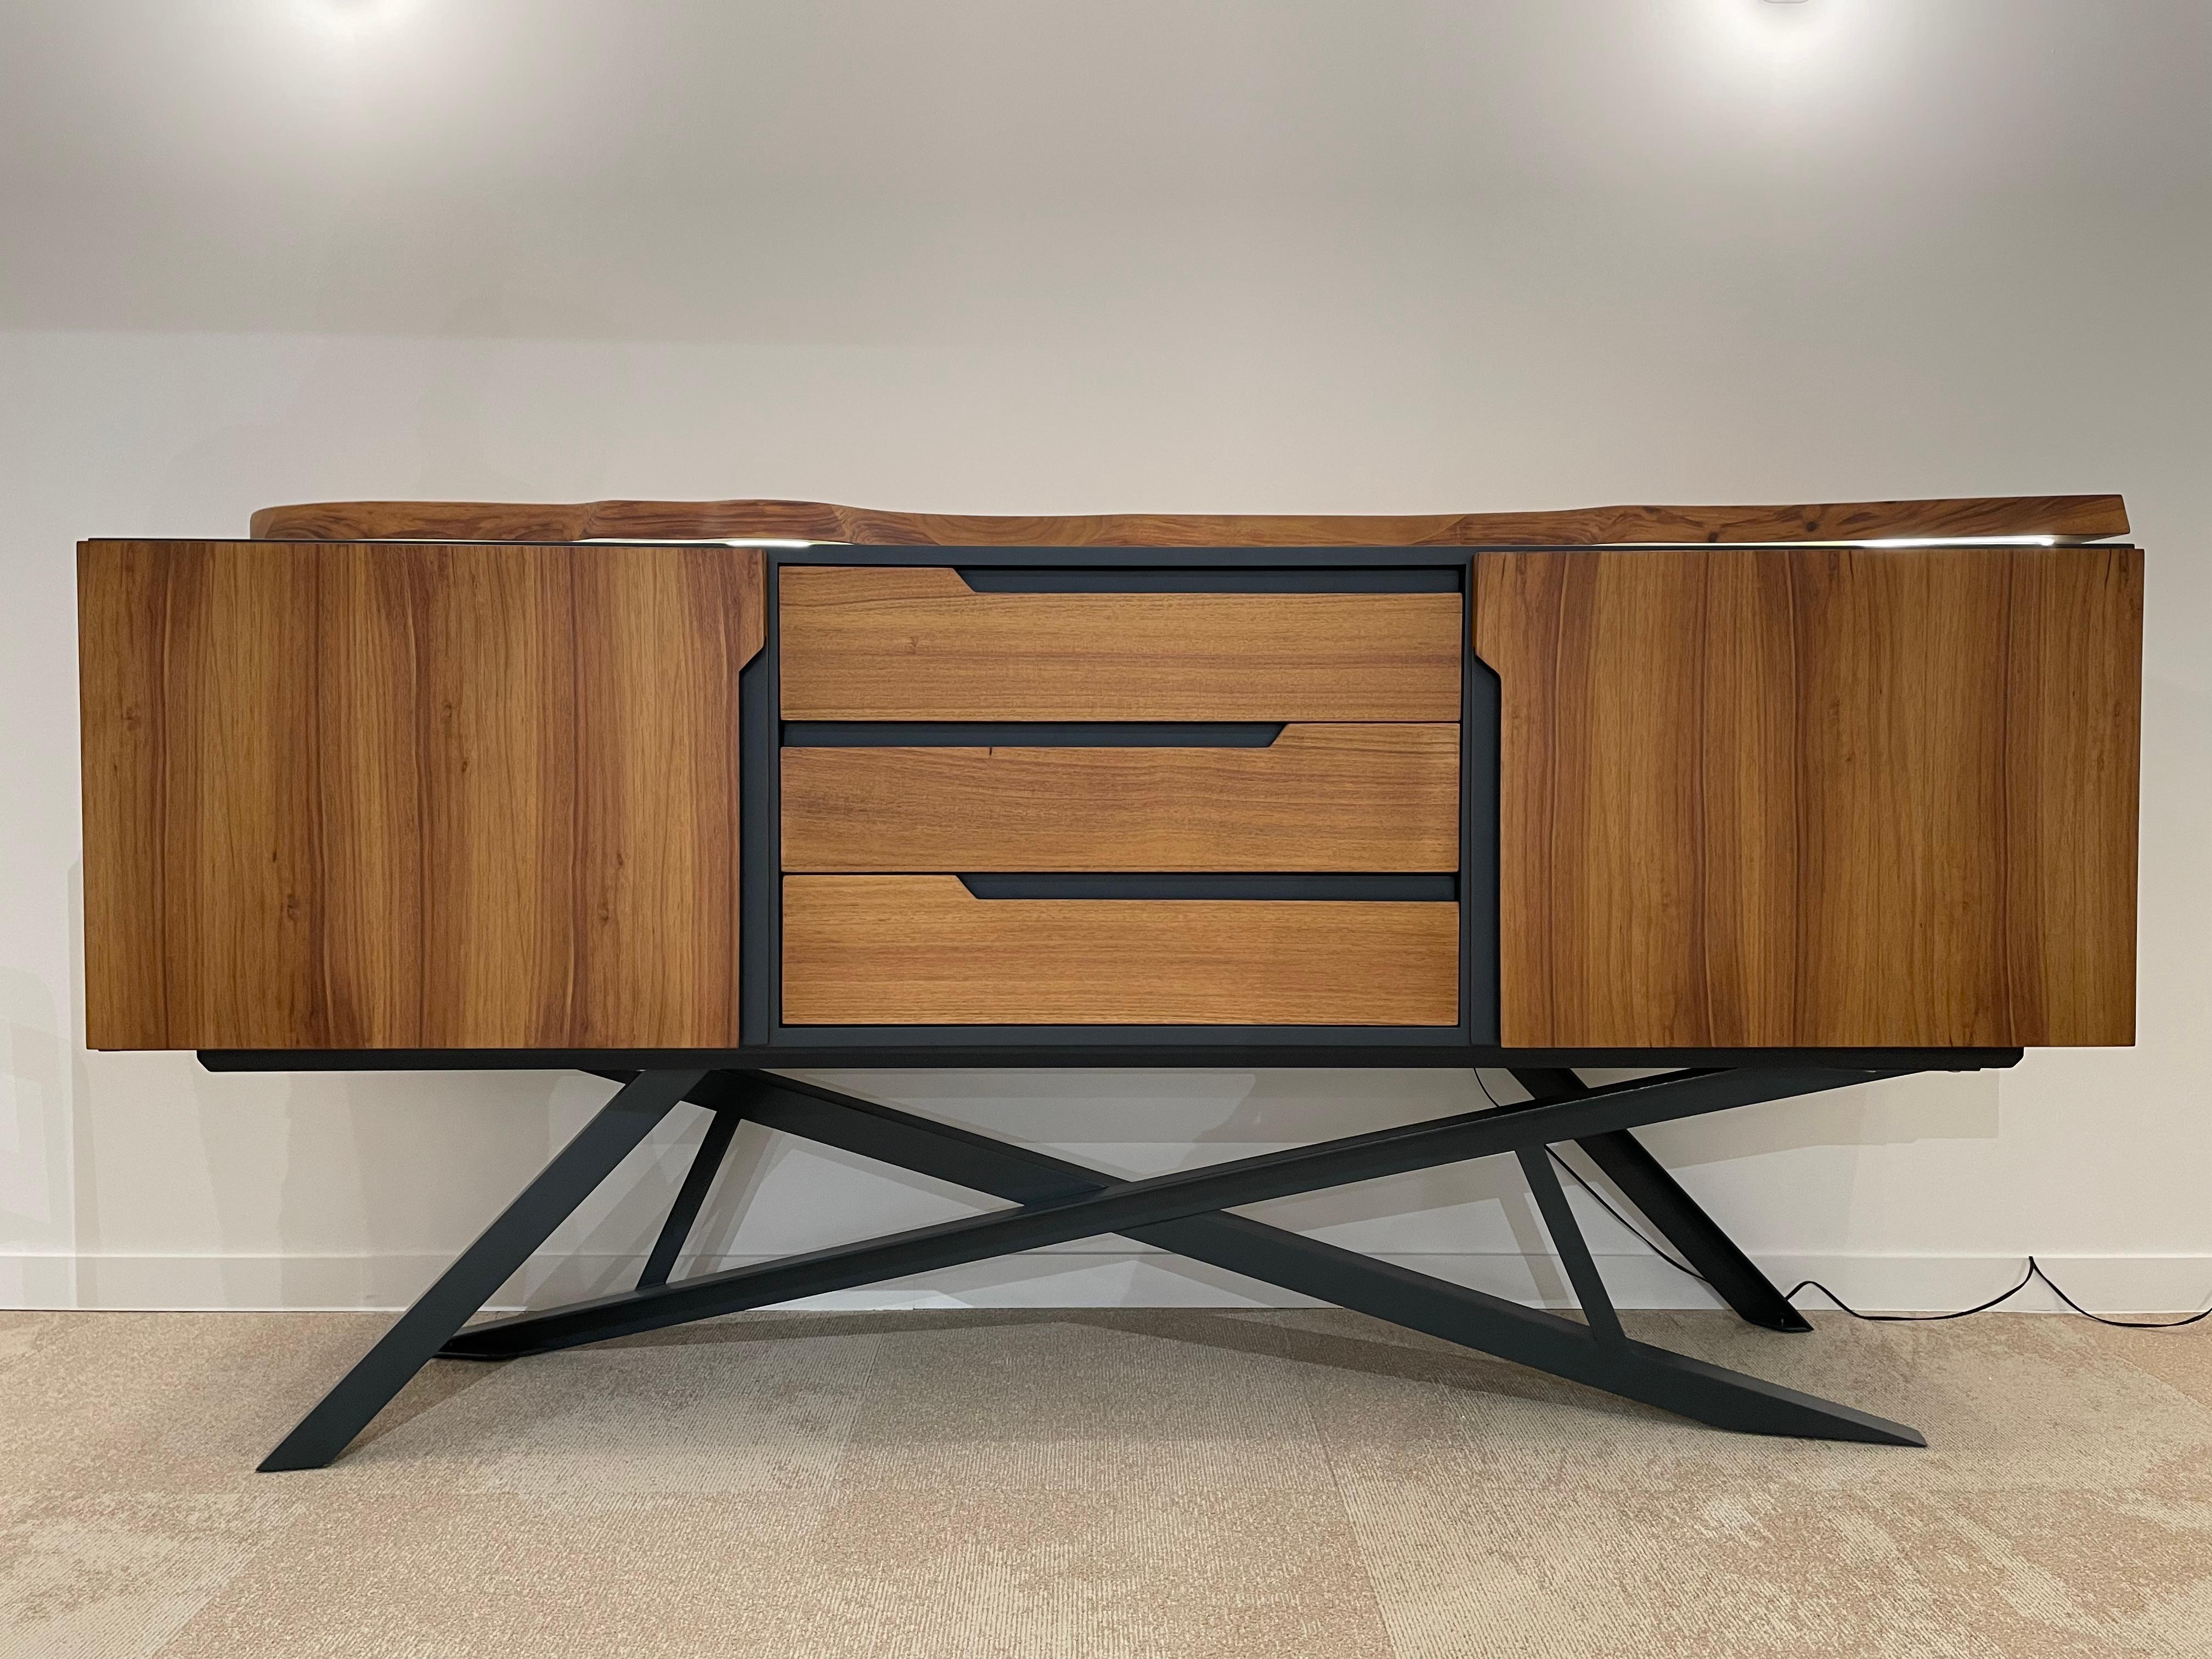 1950s Design and MCM style wood and metal sideboard with lightened top in hight quality craftmanship and fully customizable in sizes, color, wood.